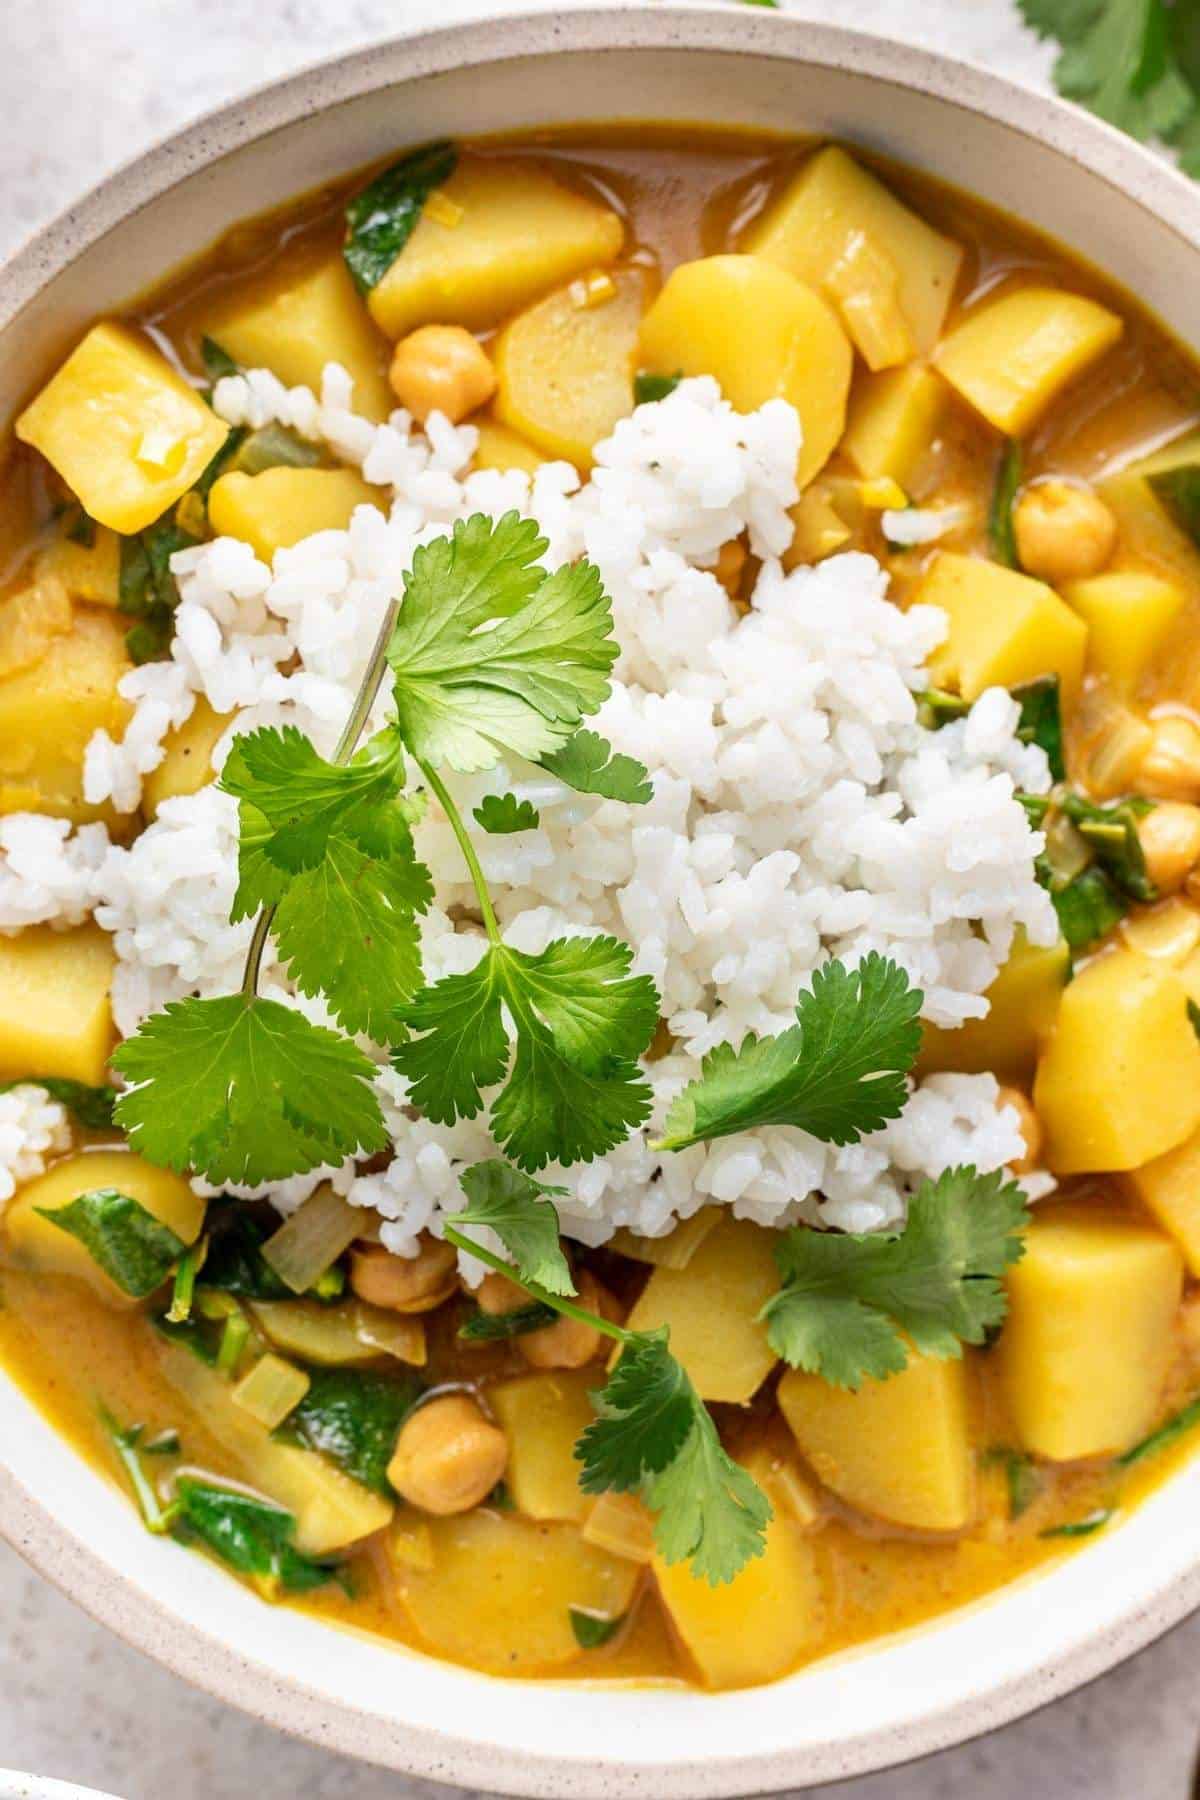 Closeup of yellow curry with potatoes, chickpeas, and white rice.